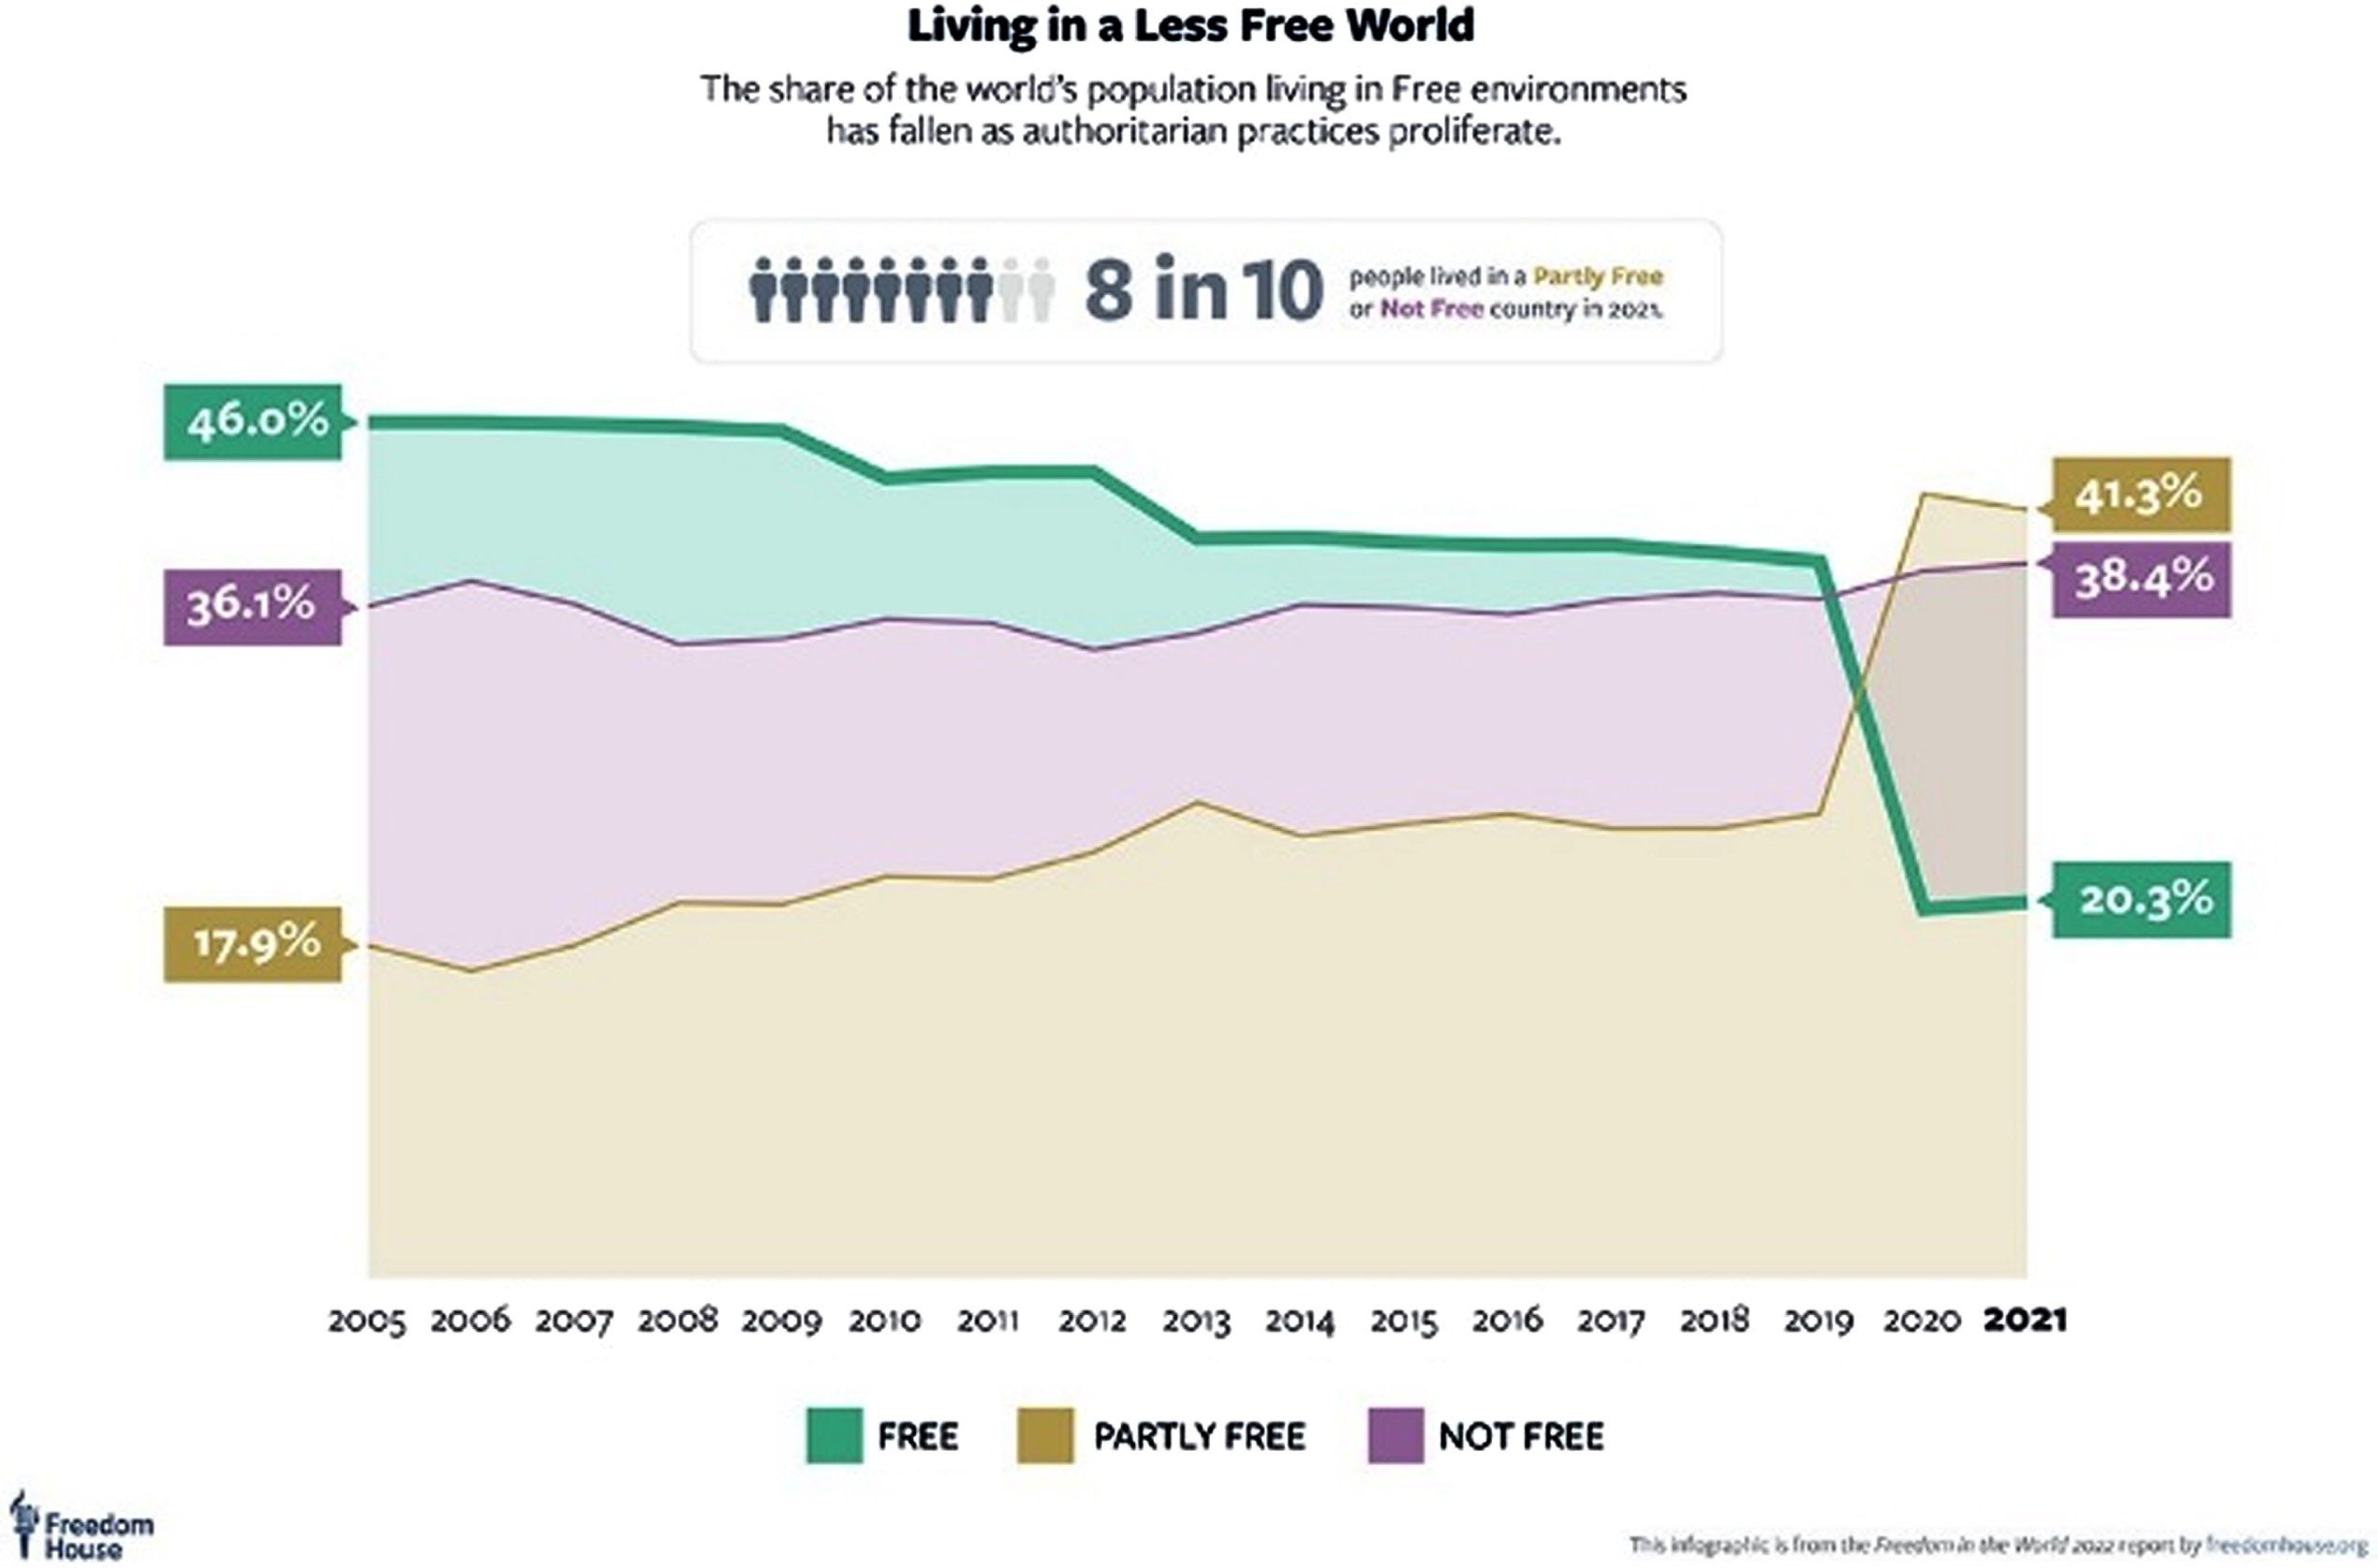 Living a Less Free World. Freedom House Freedom in the World Report 2022, page 4.